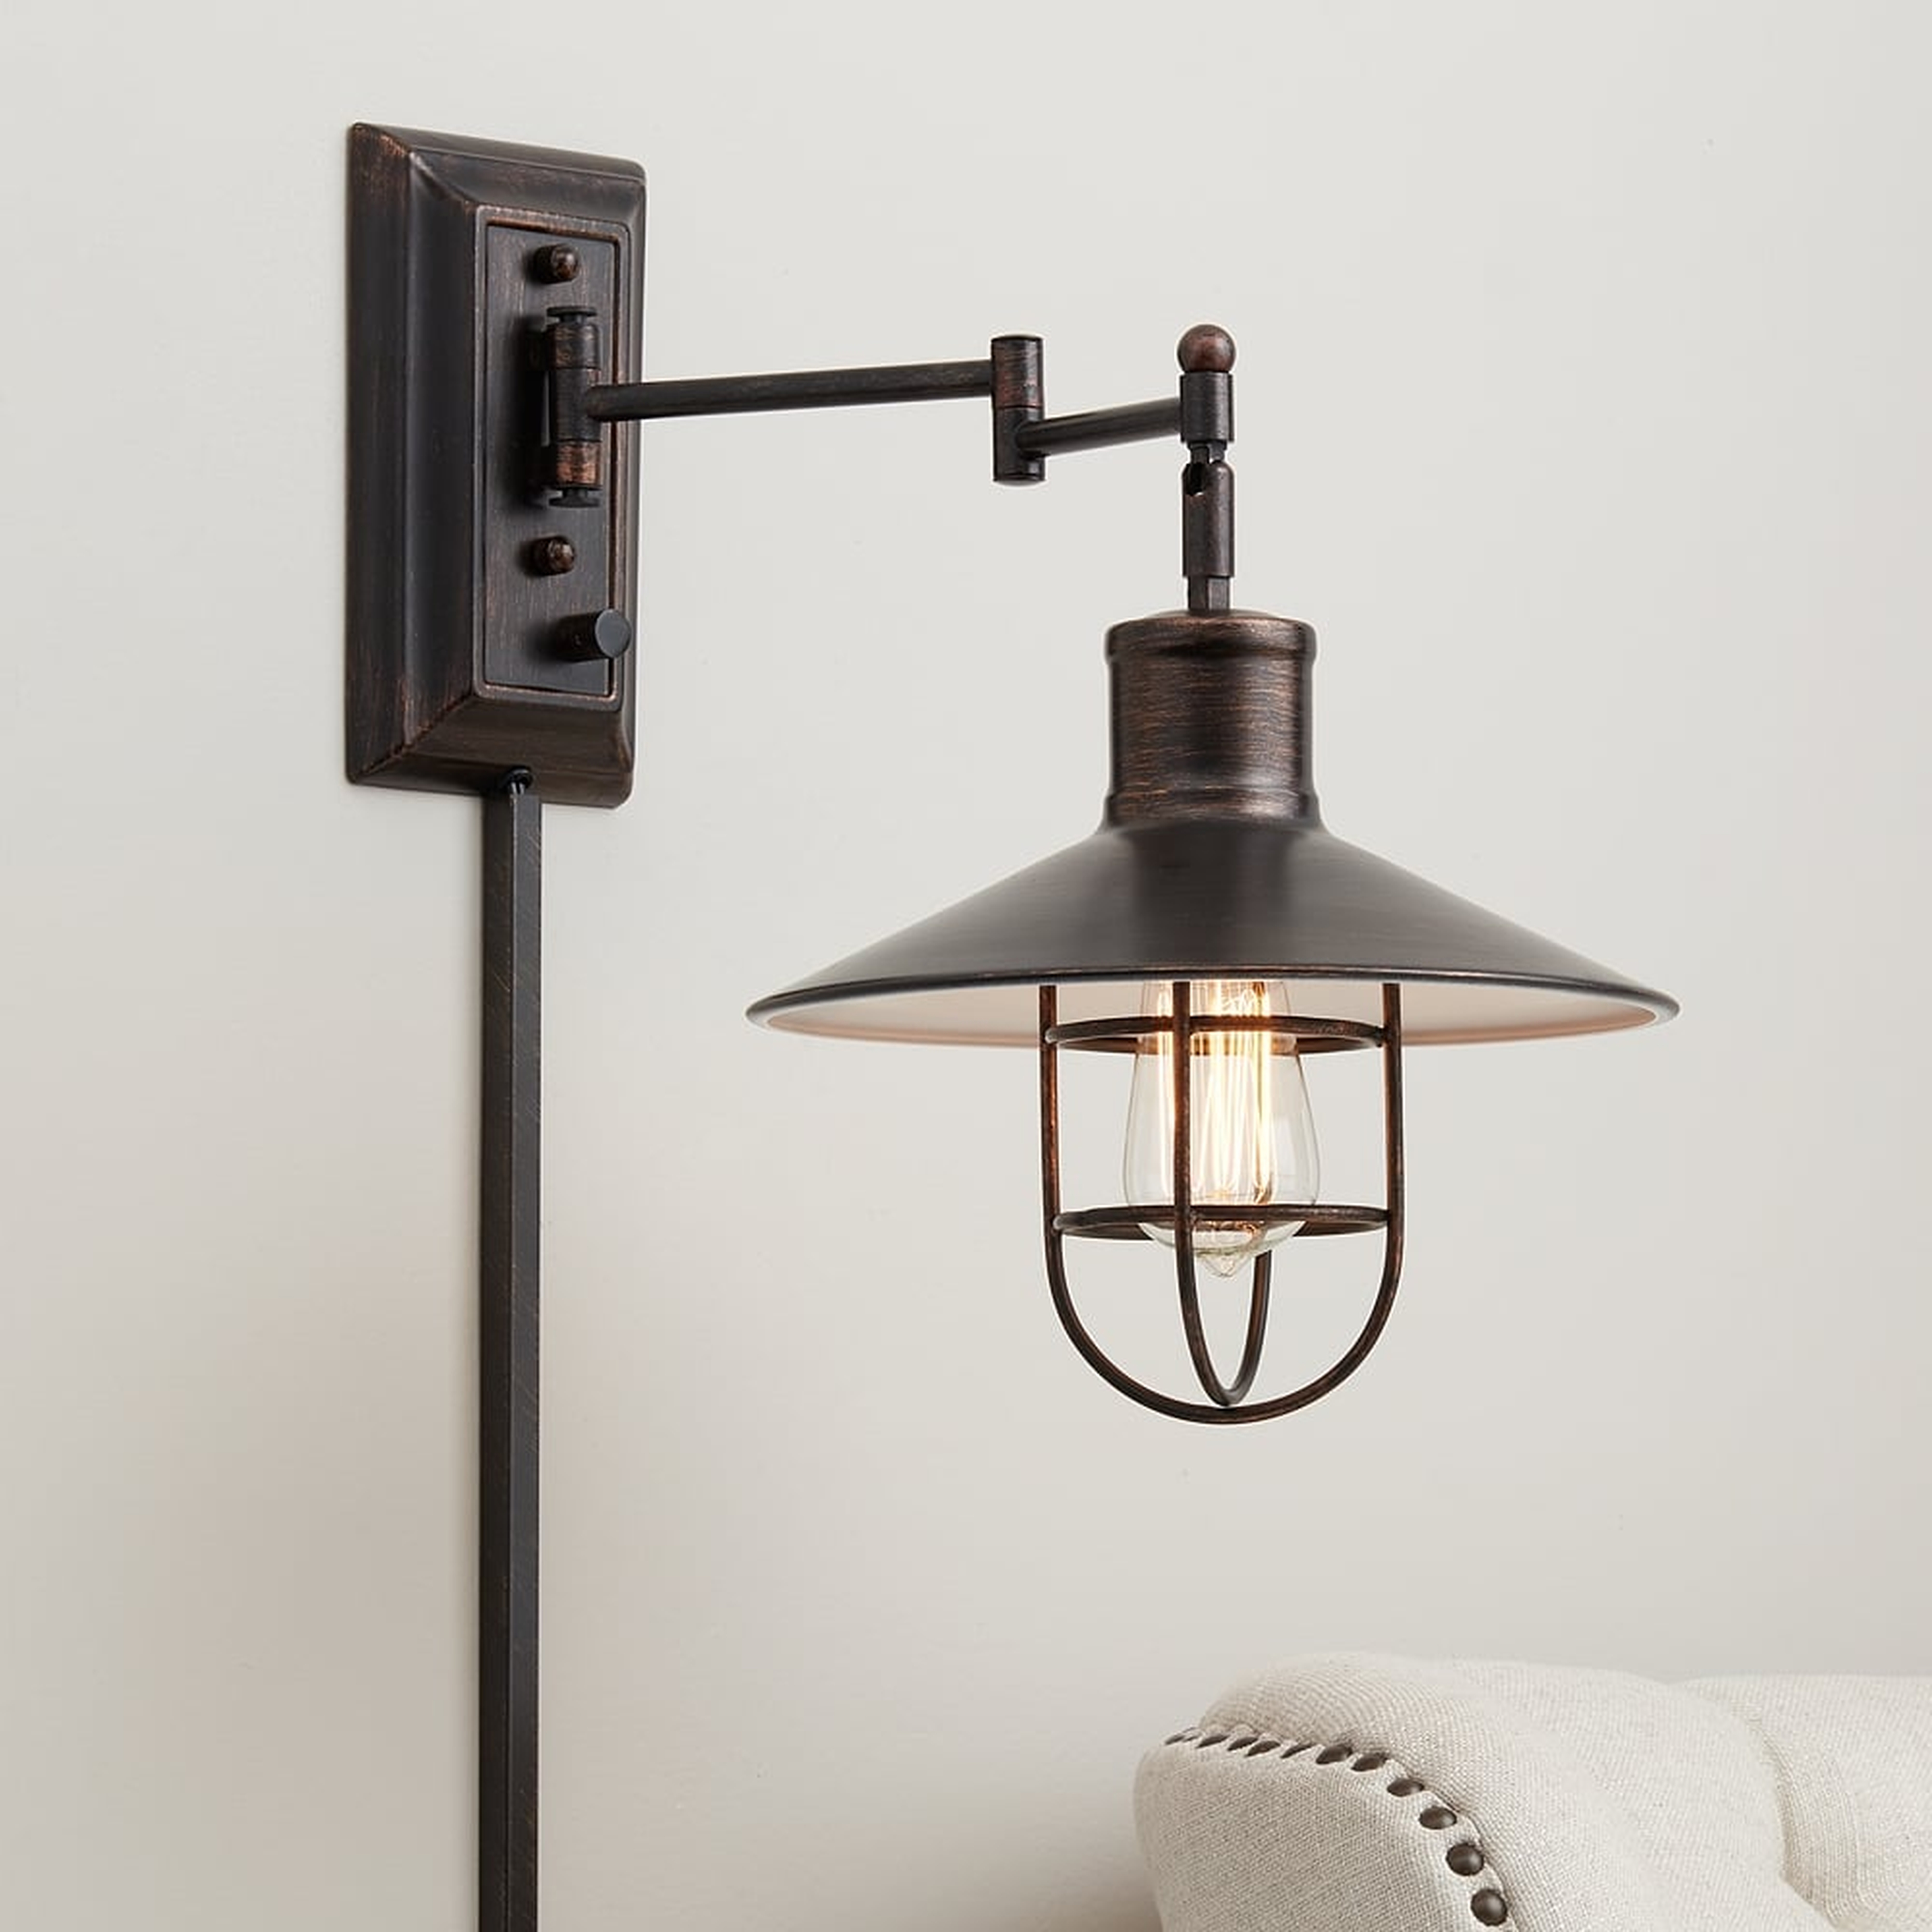 Hektor Brushed Bronze Plug-In Swing Arm Wall Lamp - Style # 19P50 - Lamps Plus